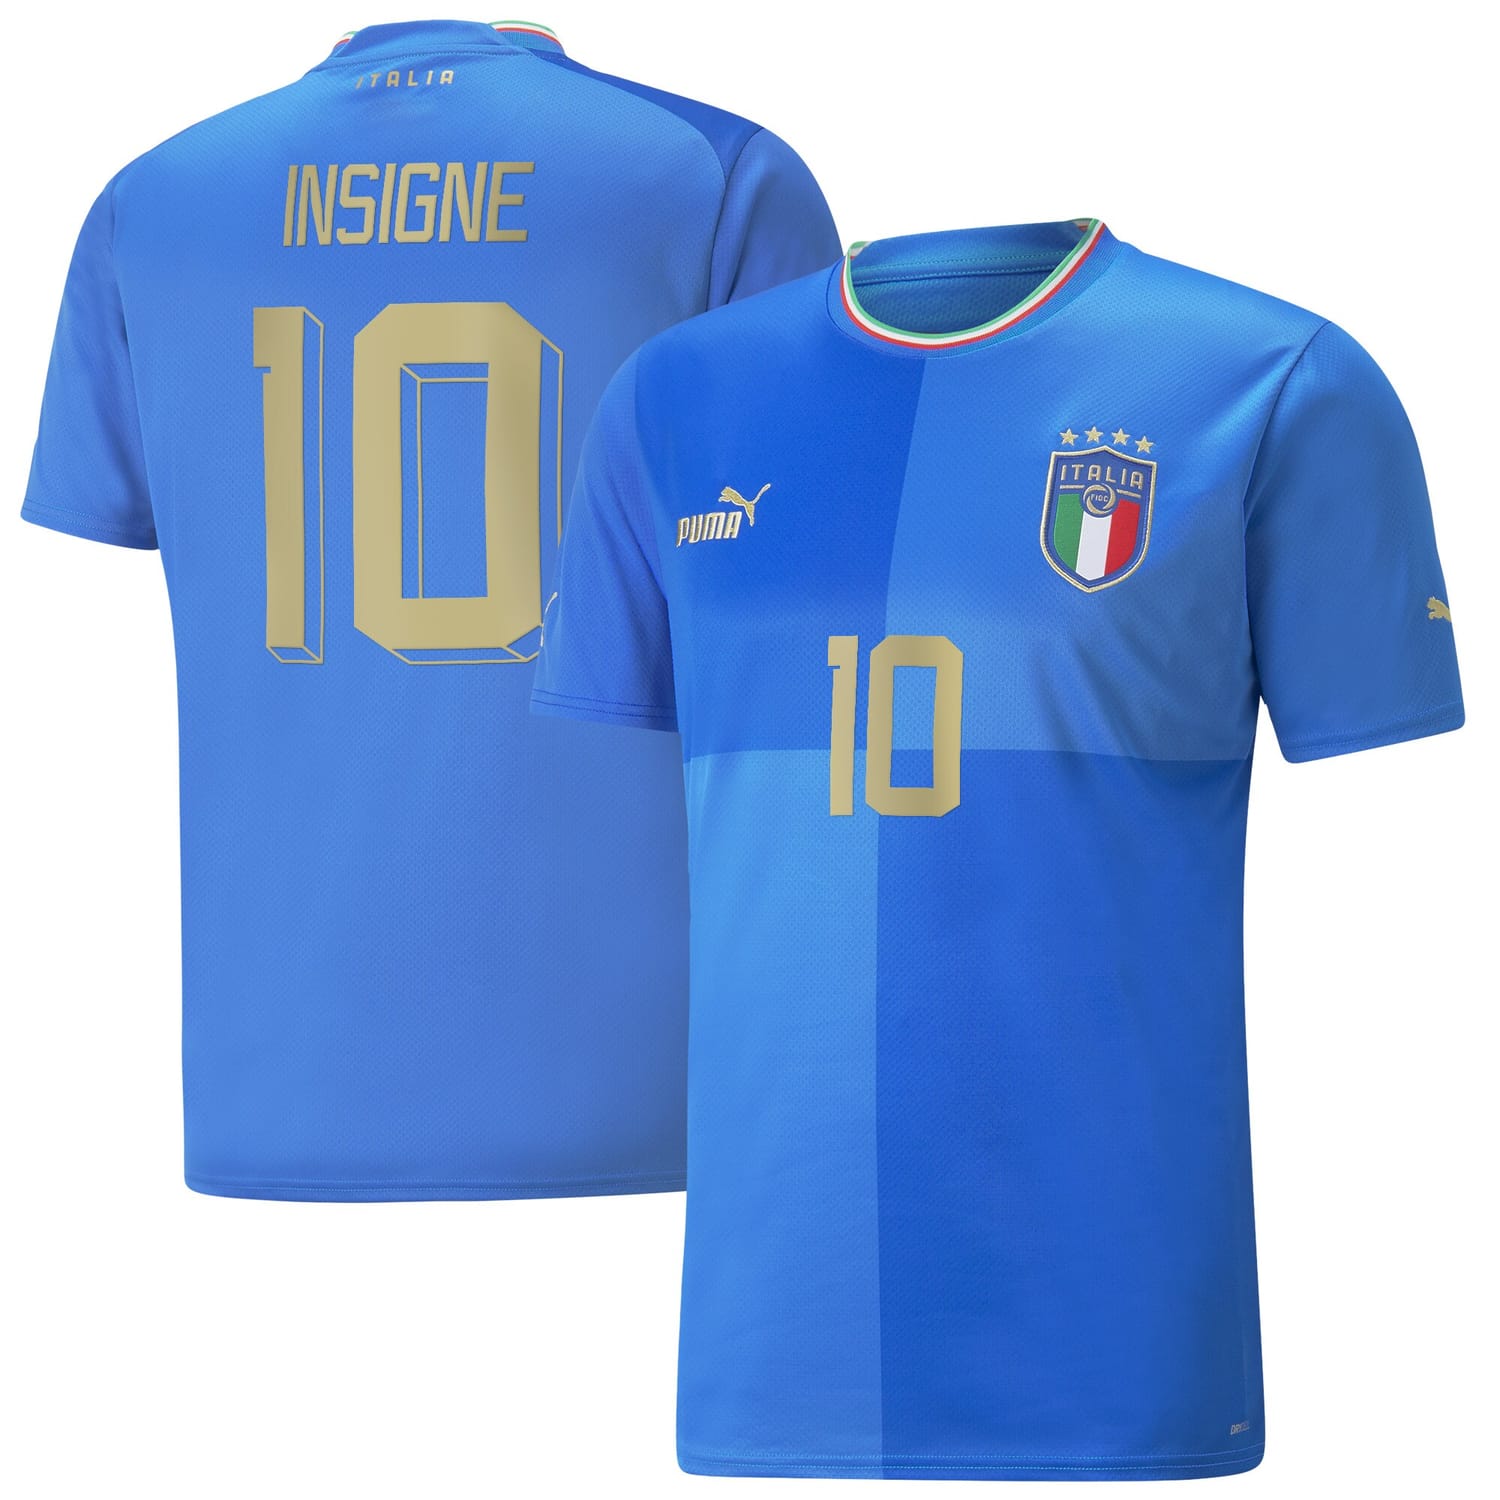 Italy National Team Home Jersey Shirt Blue 2022-23 player Lorenzo Insigne printing for Men